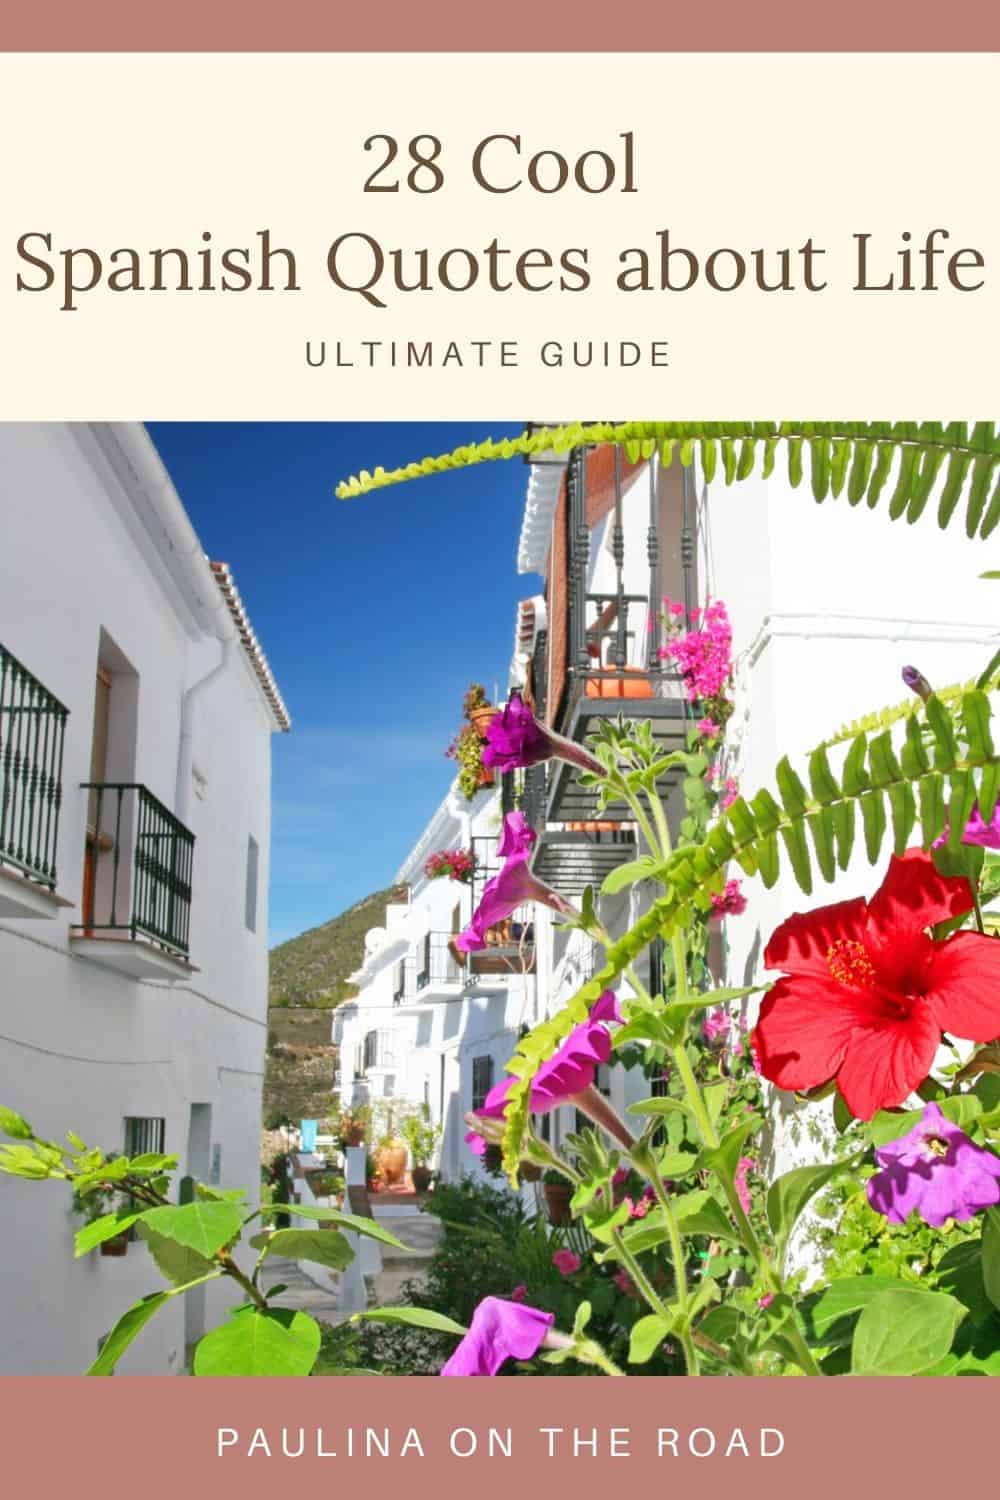 28 Spanish Quotes about Life That Will Make You Feel Good - Paulina on